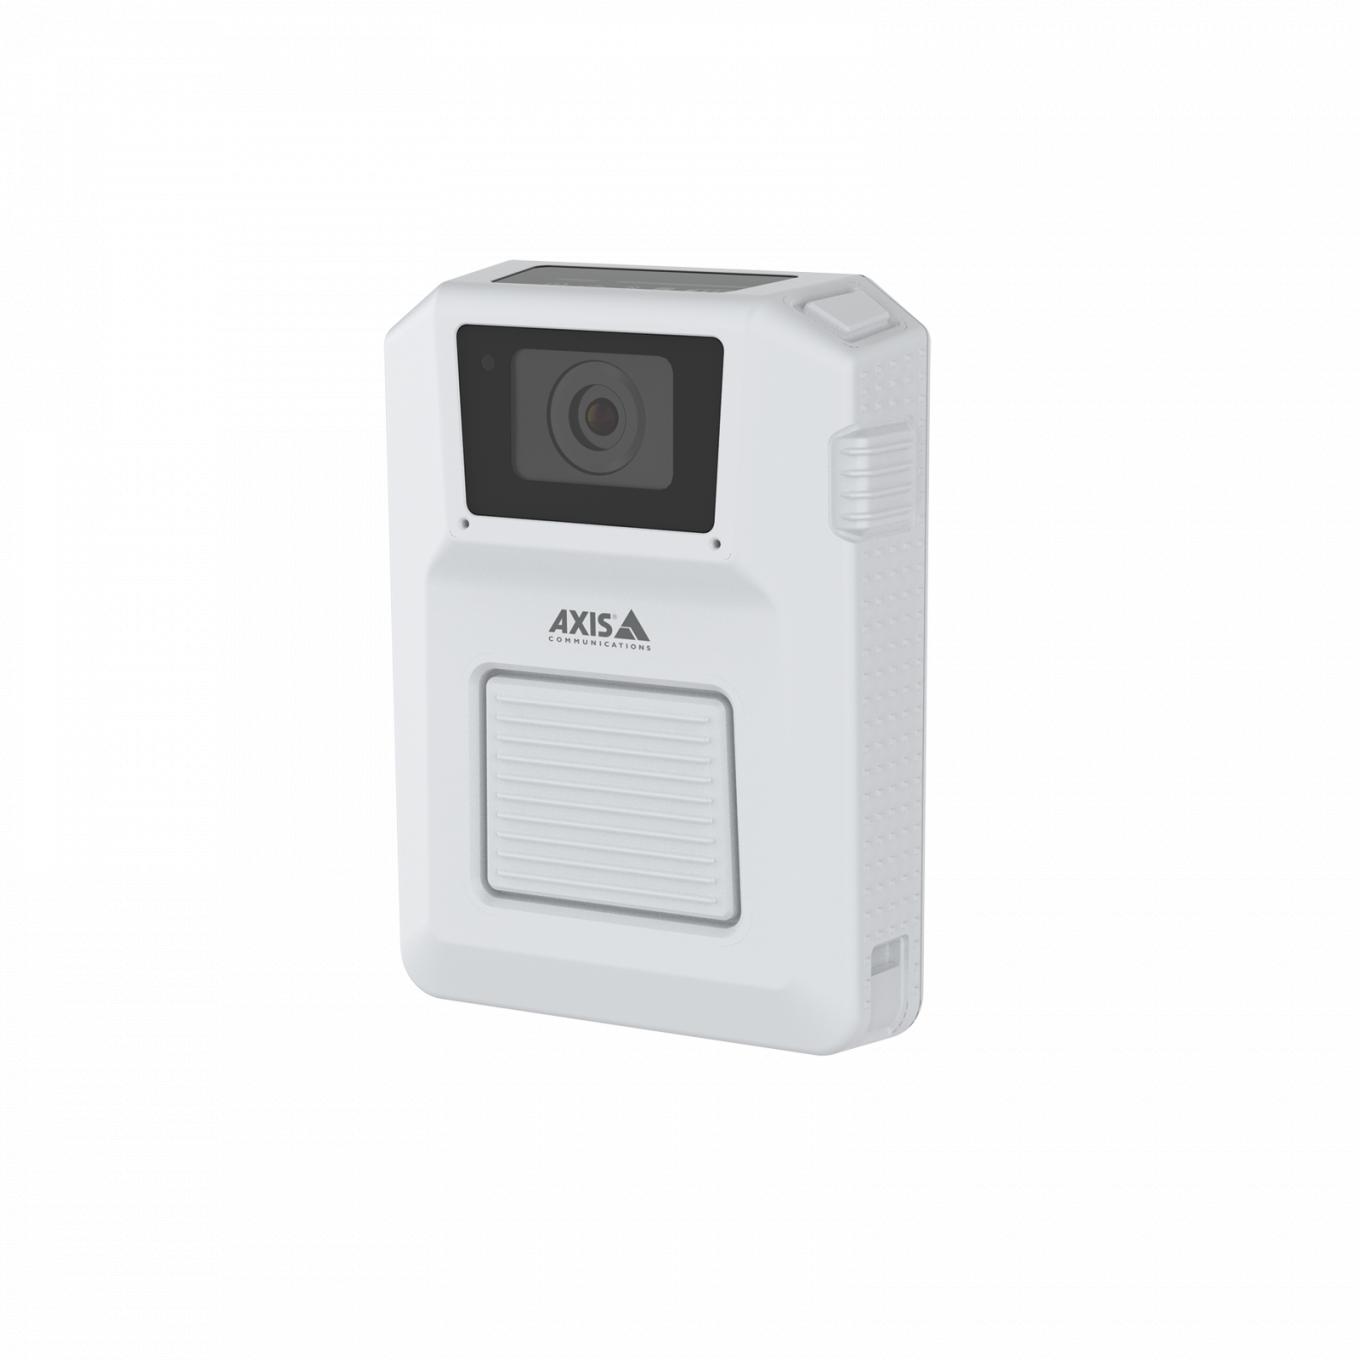 AXIS W101 Body Worn Camera in white color, viewed from its left angle